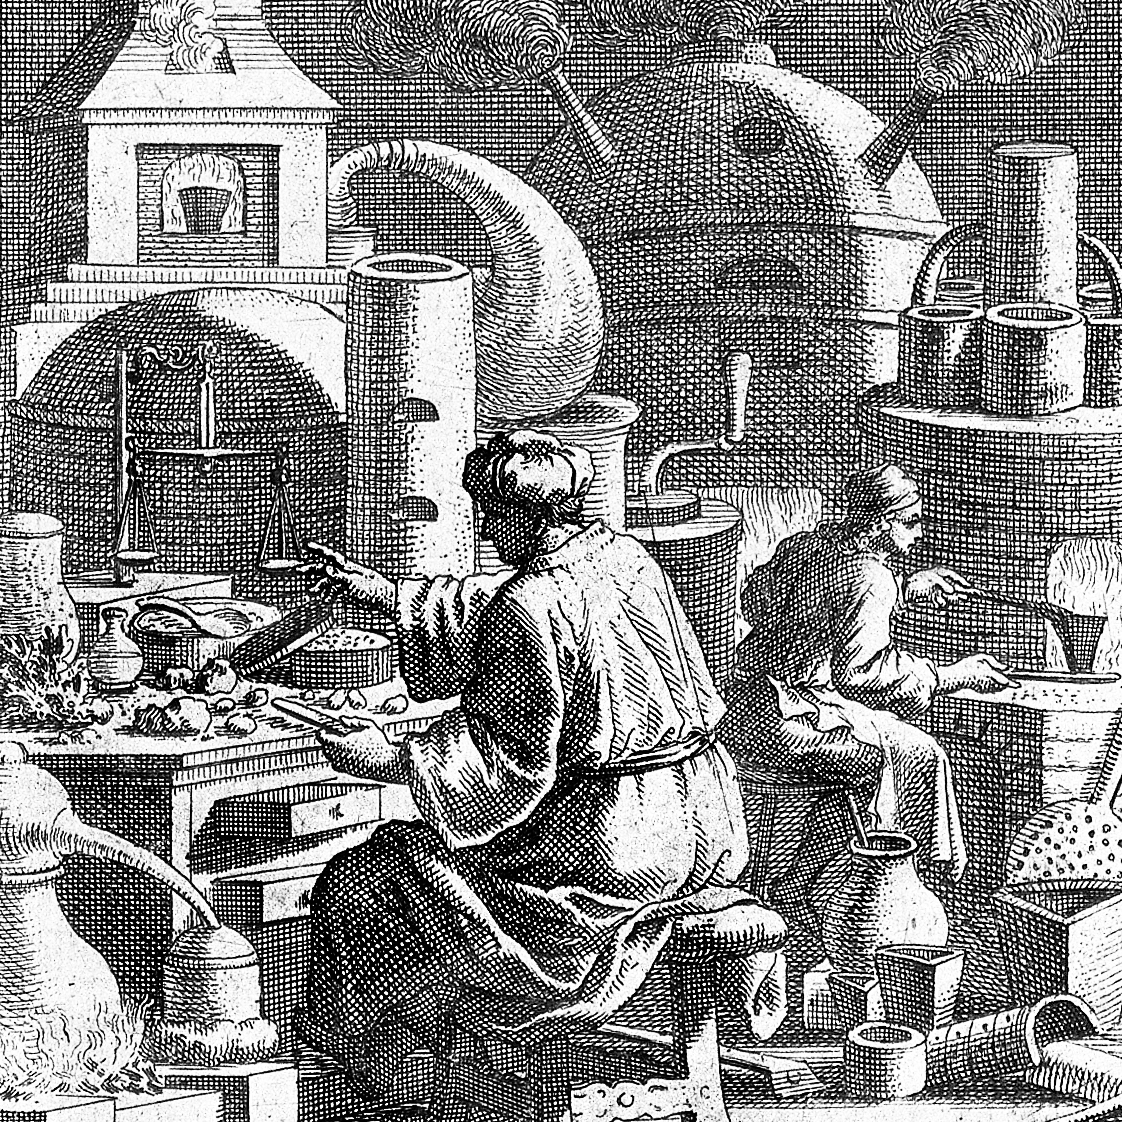 Two alchemists seeming to produce gold from a furnace; the accompanying text satirises those who pursue alchemy for gold alone. Engraving by C. Weigel, 1698.